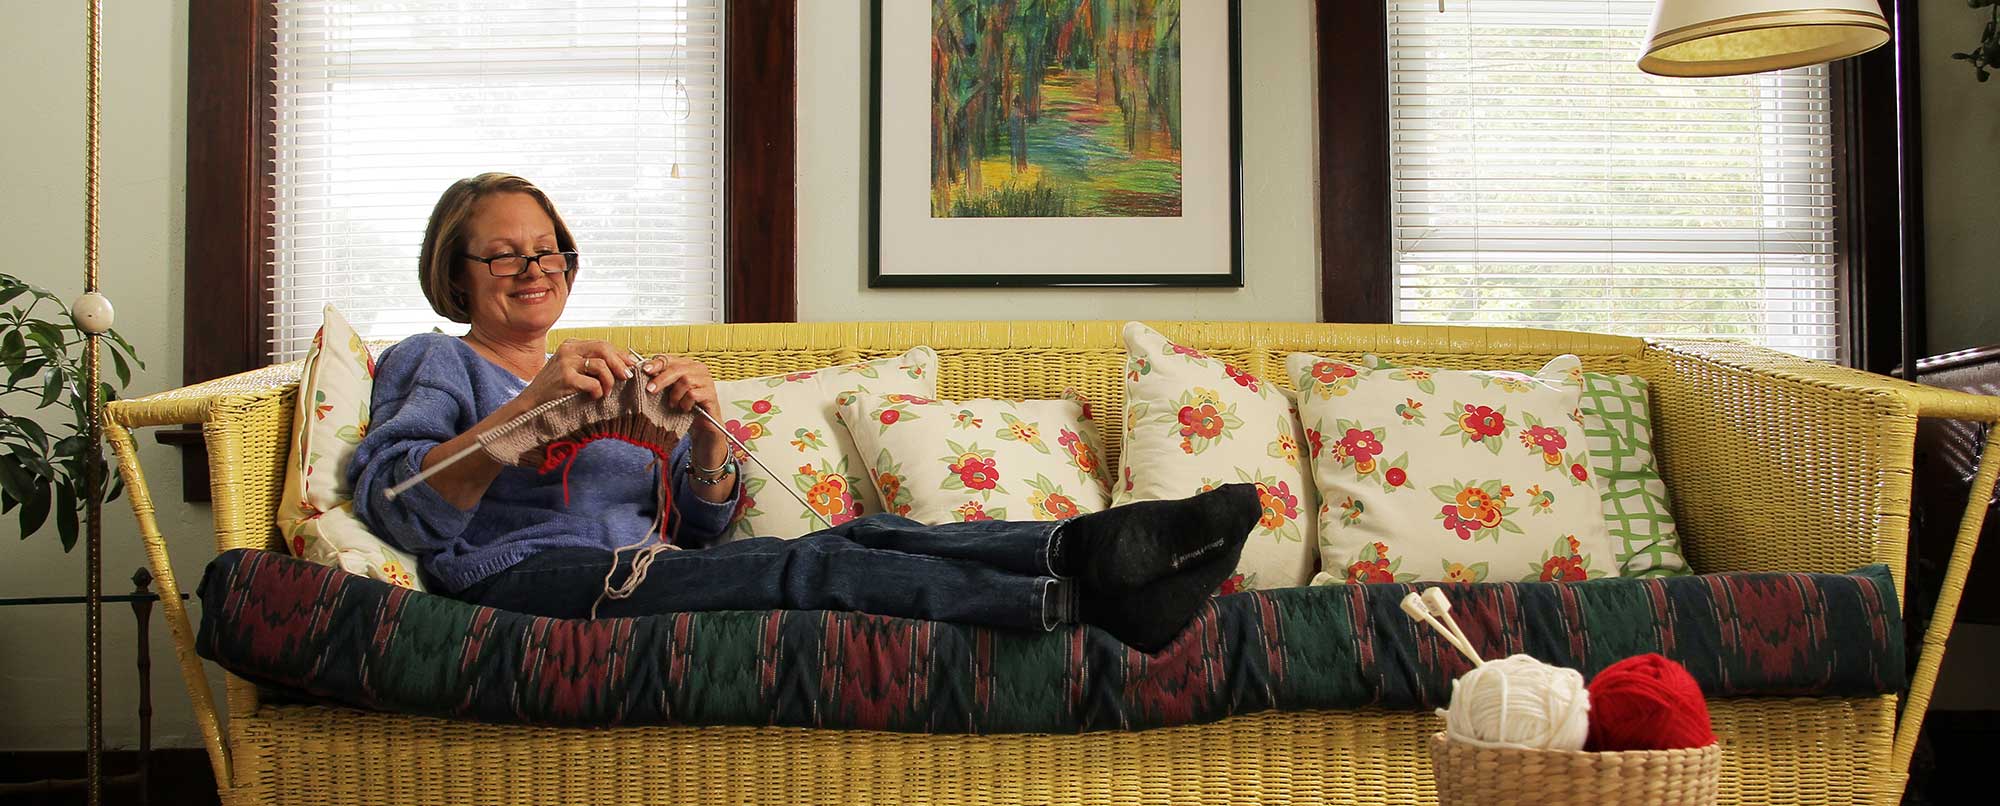 A woman sitting on a couch while she enjoyingly knits.